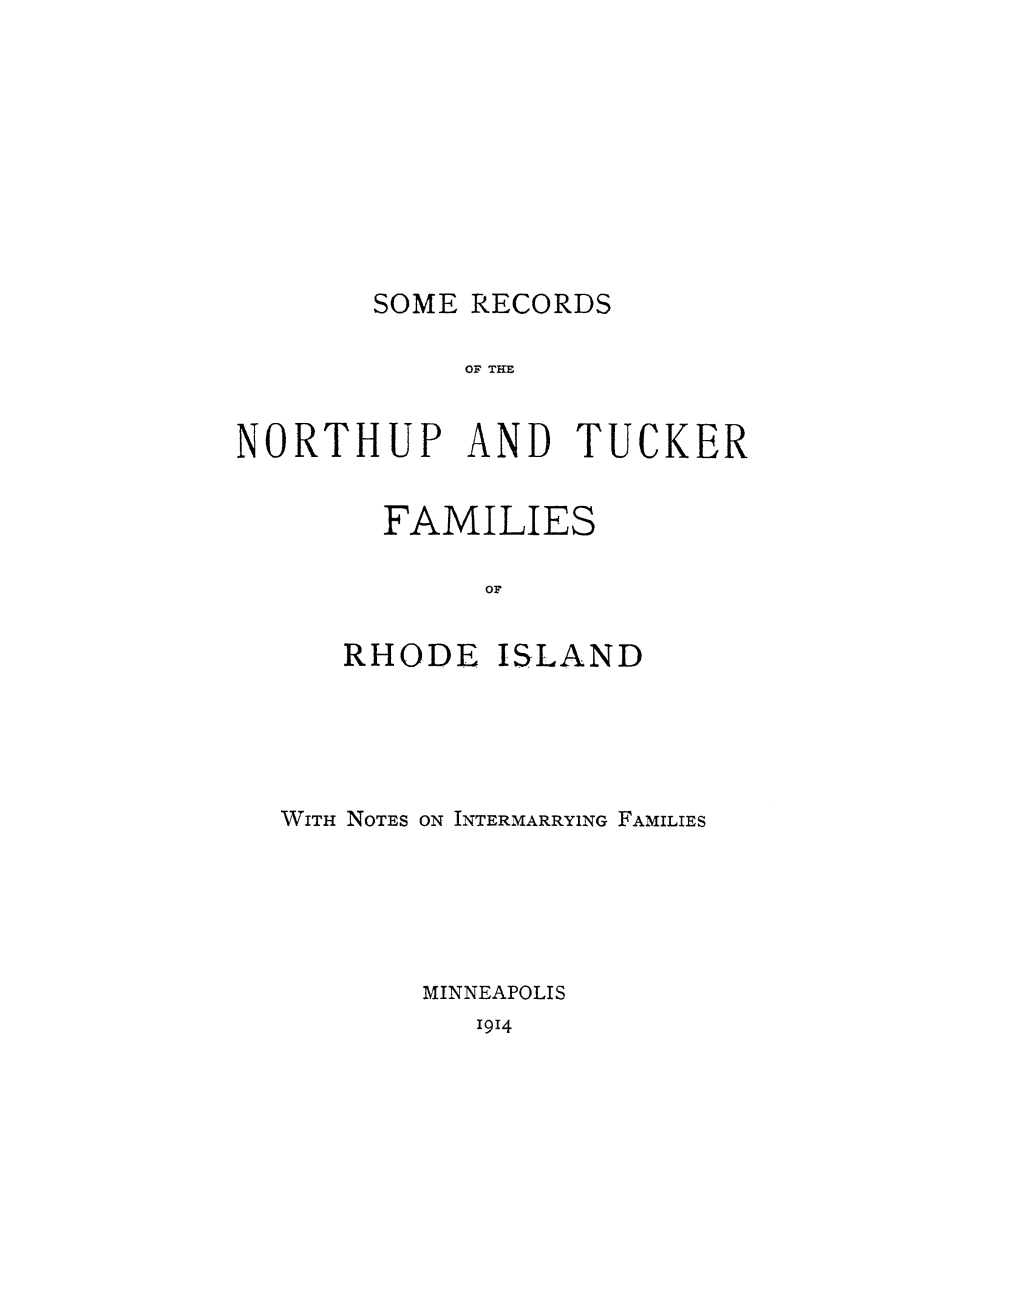 Northup and Tucker Families